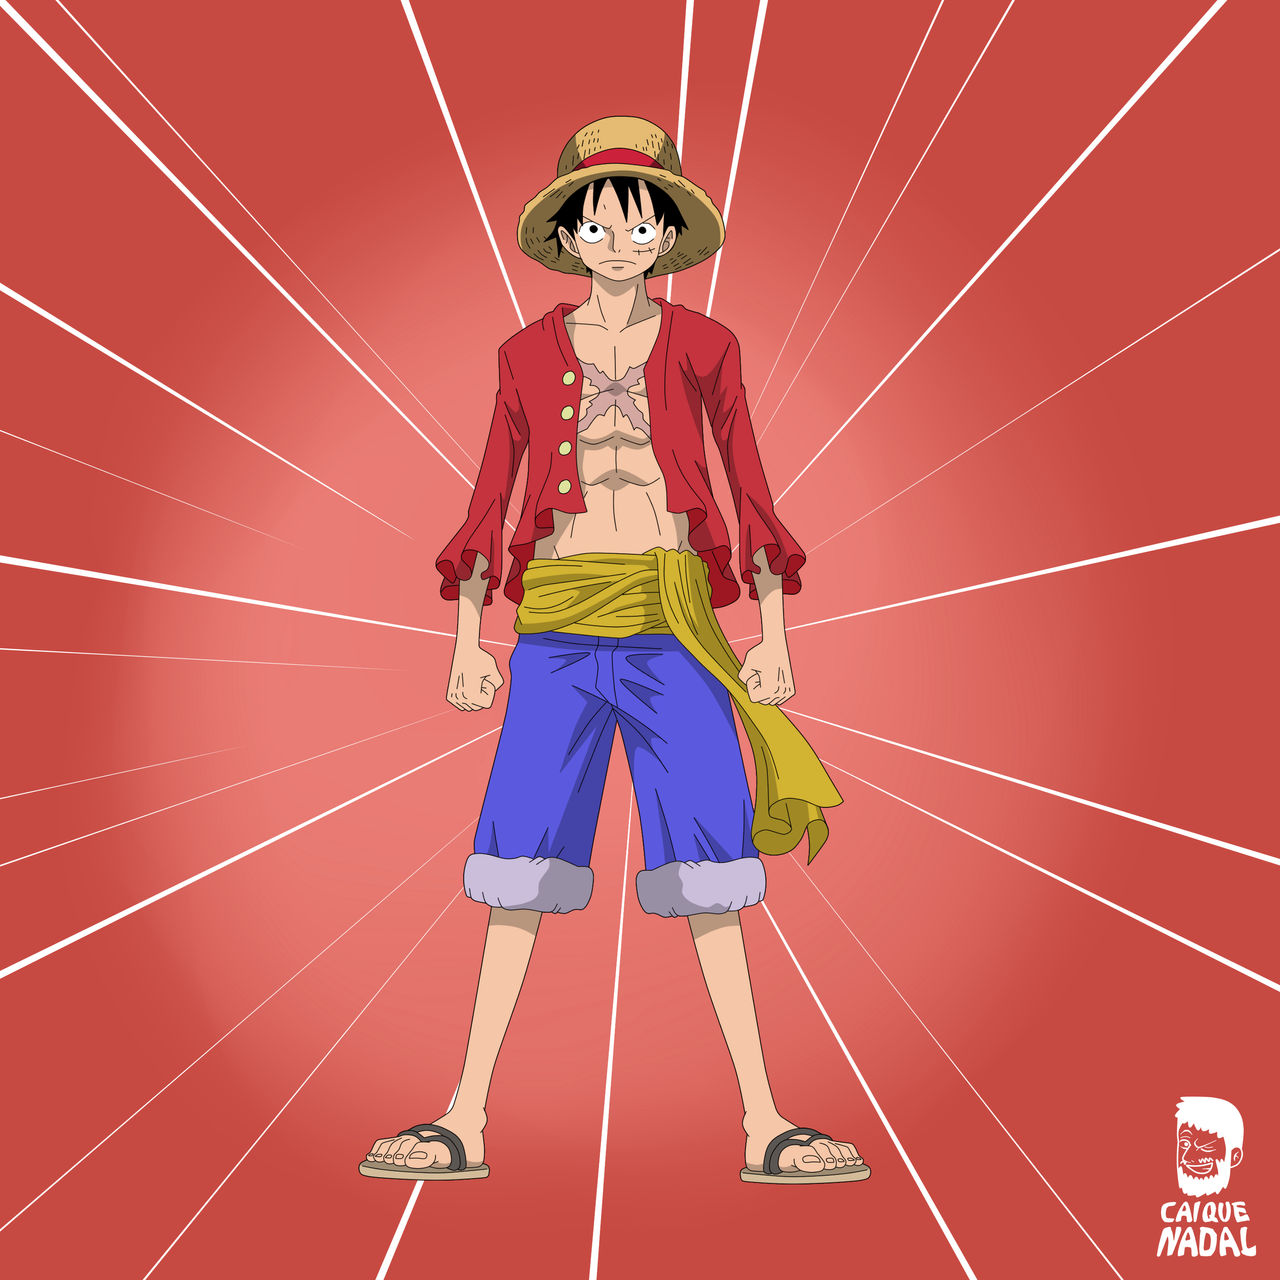 King - One Piece by caiquenadal on DeviantArt